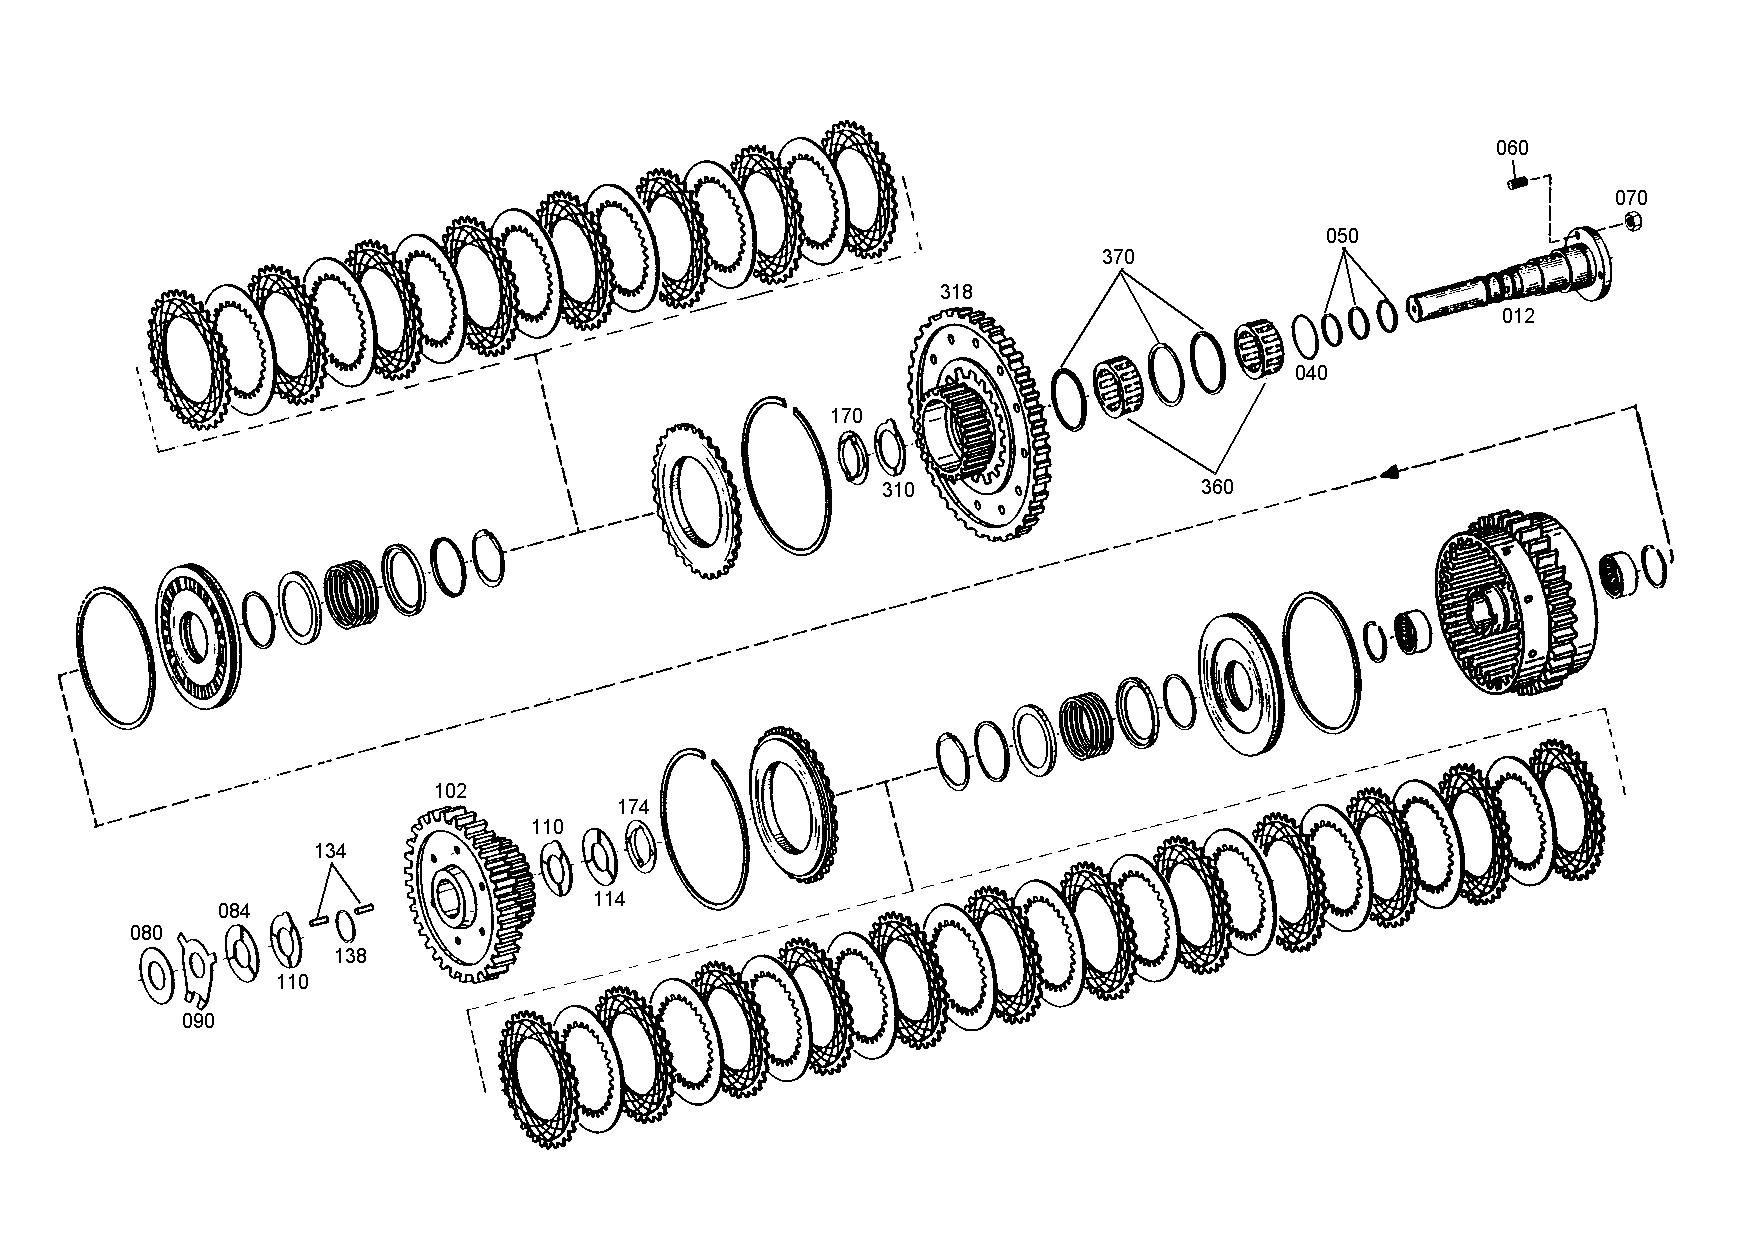 drawing for MOXY TRUCKS AS 052180 - ROLLER CAGE (figure 3)